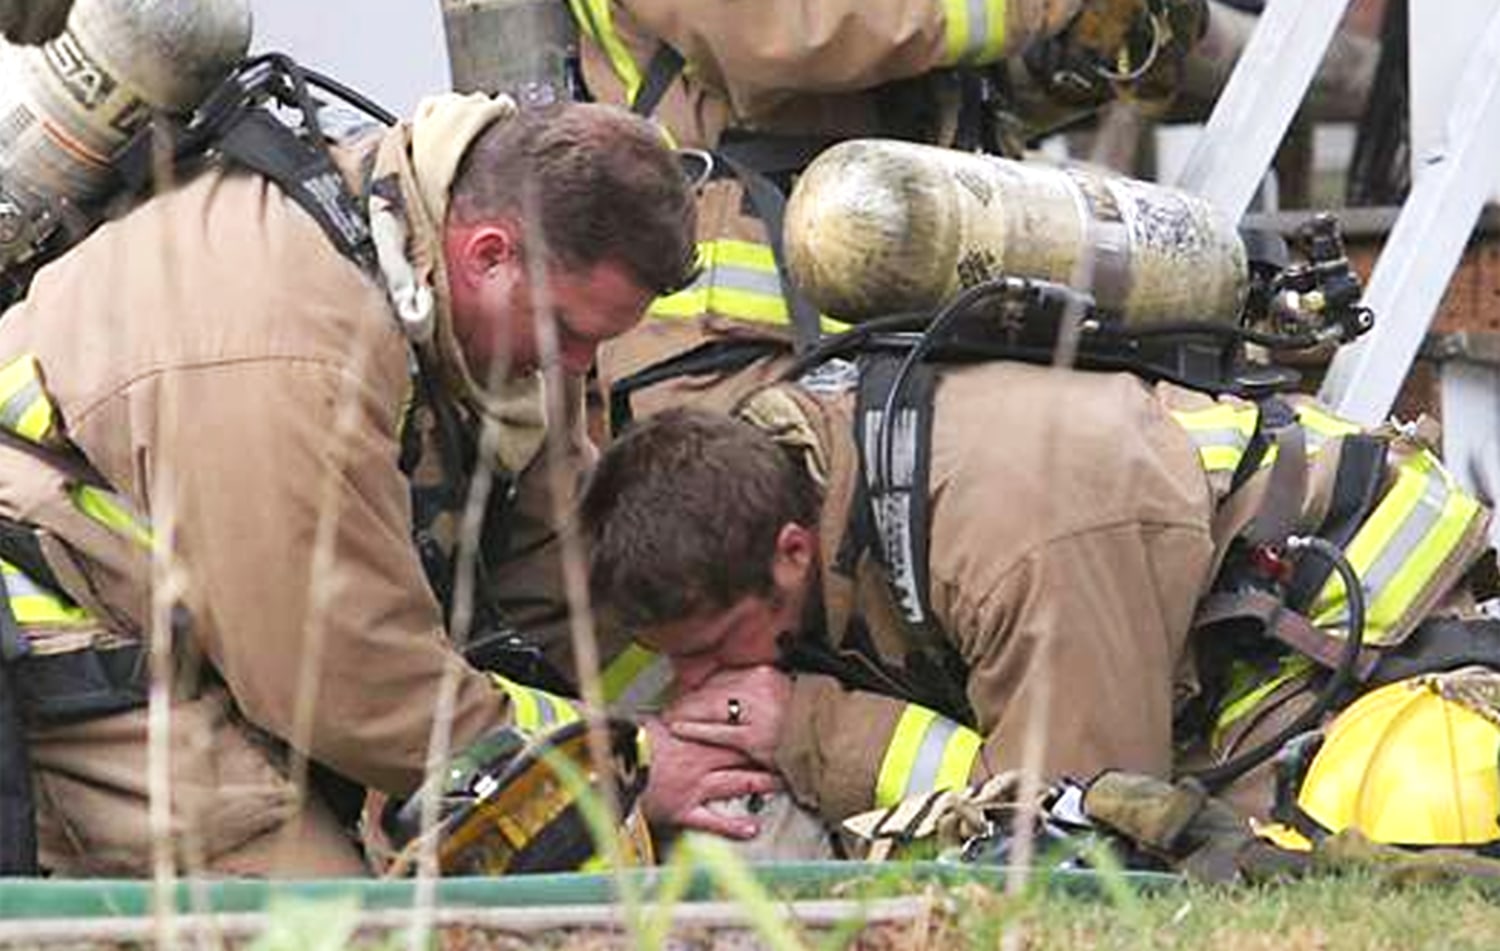 Firefighter revives dog, mouth to snout